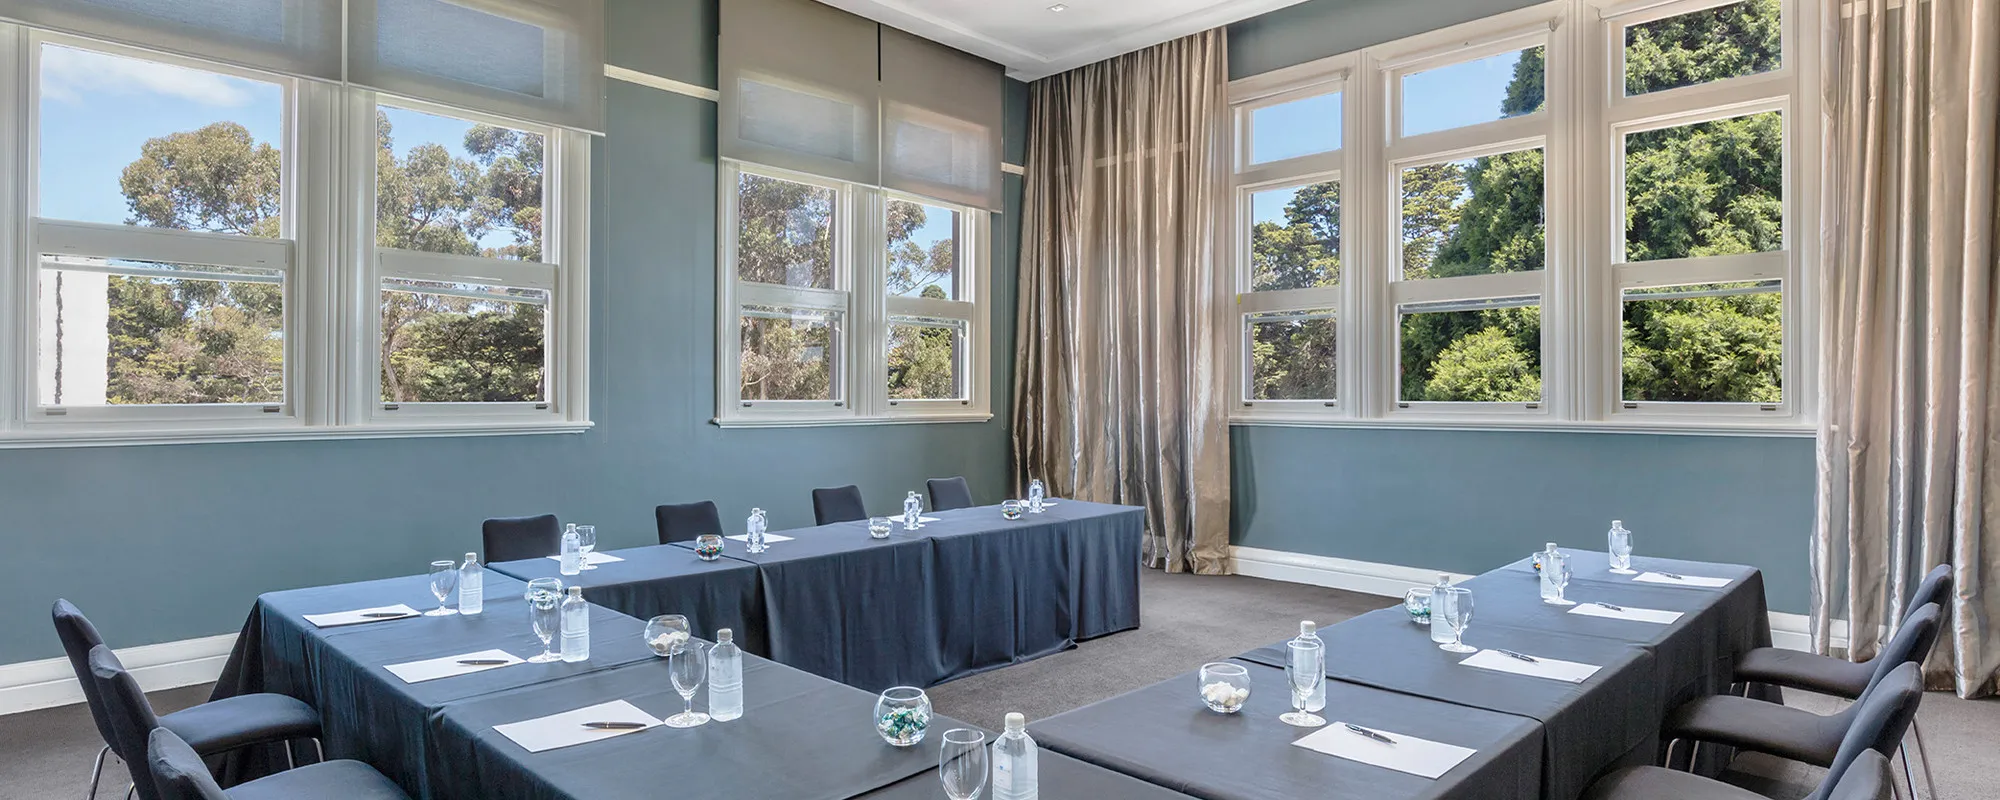 Lancemore Mansion Hotel Werribee Park Conference Venue Regional Conferencing Mannix and Brennan 2000 x 800